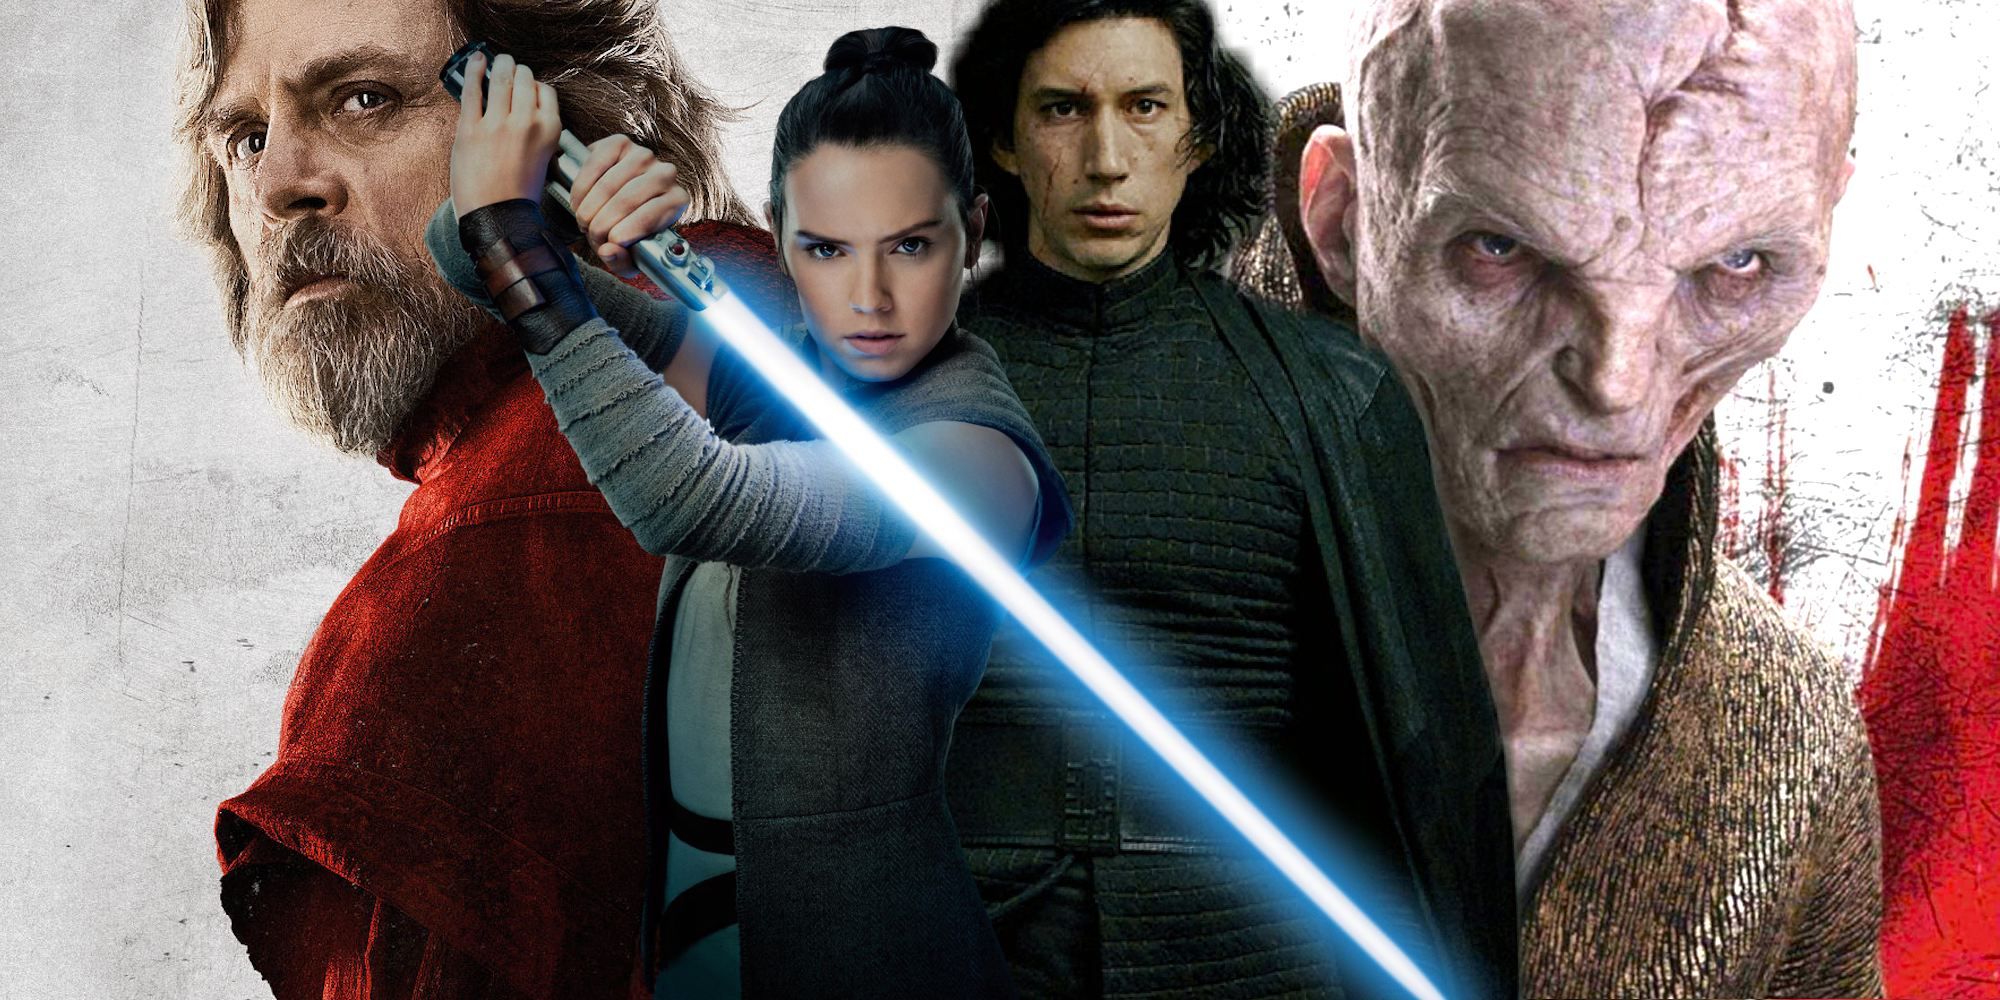 Star Wars 8: Will Rey AND Kylo Ren Betray Their Masters?